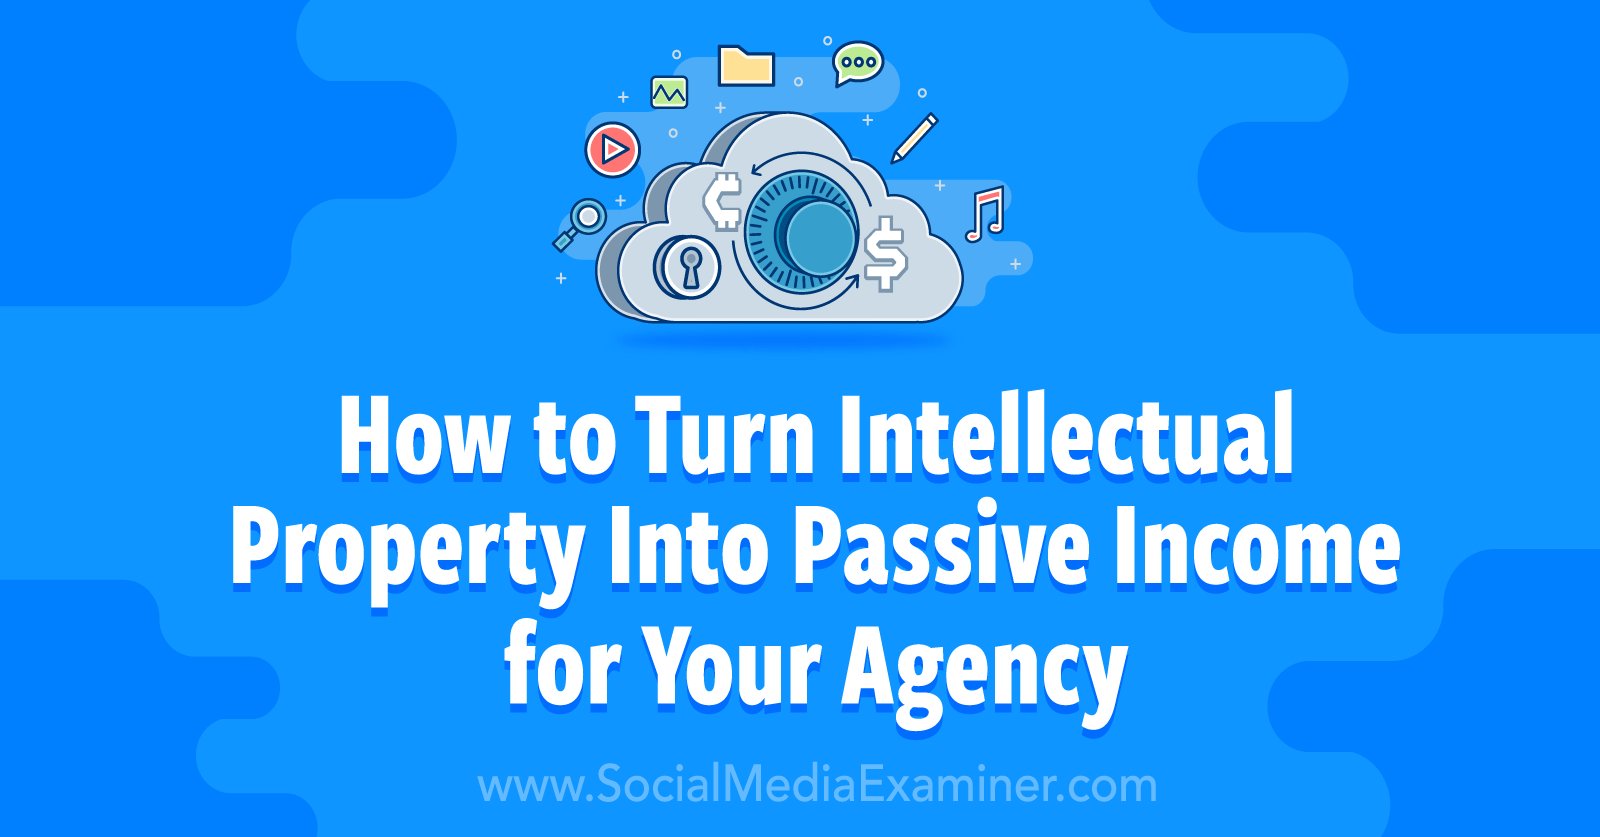 How to Turn Intellectual Property Into Passive Income for Your Agency by Social Media Examiner